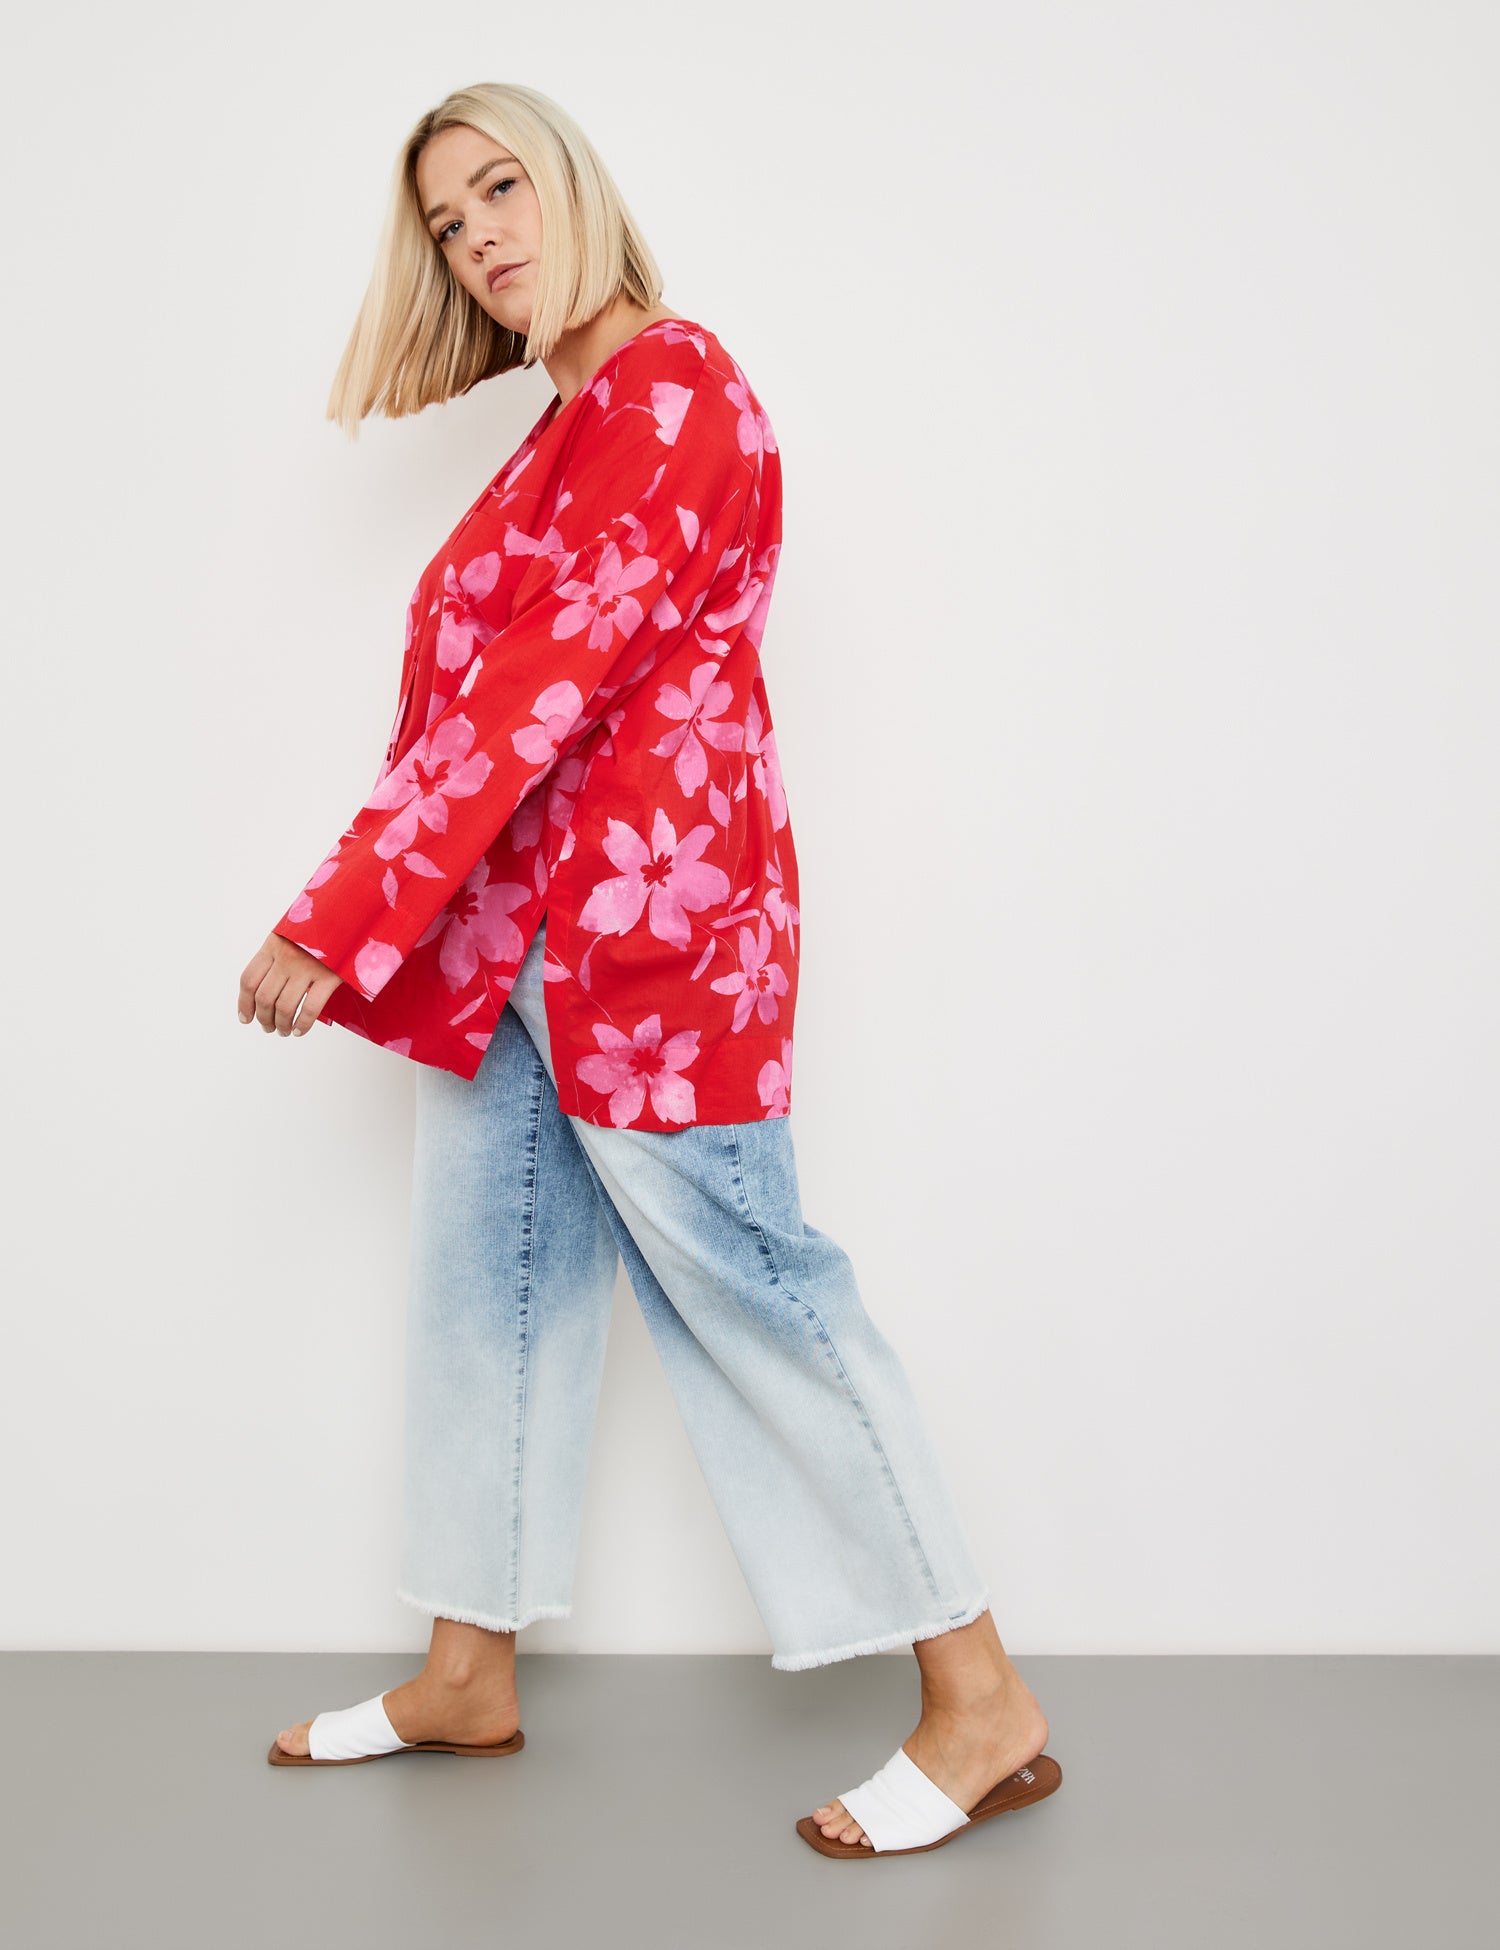 Cotton Blouse With Large Flowers